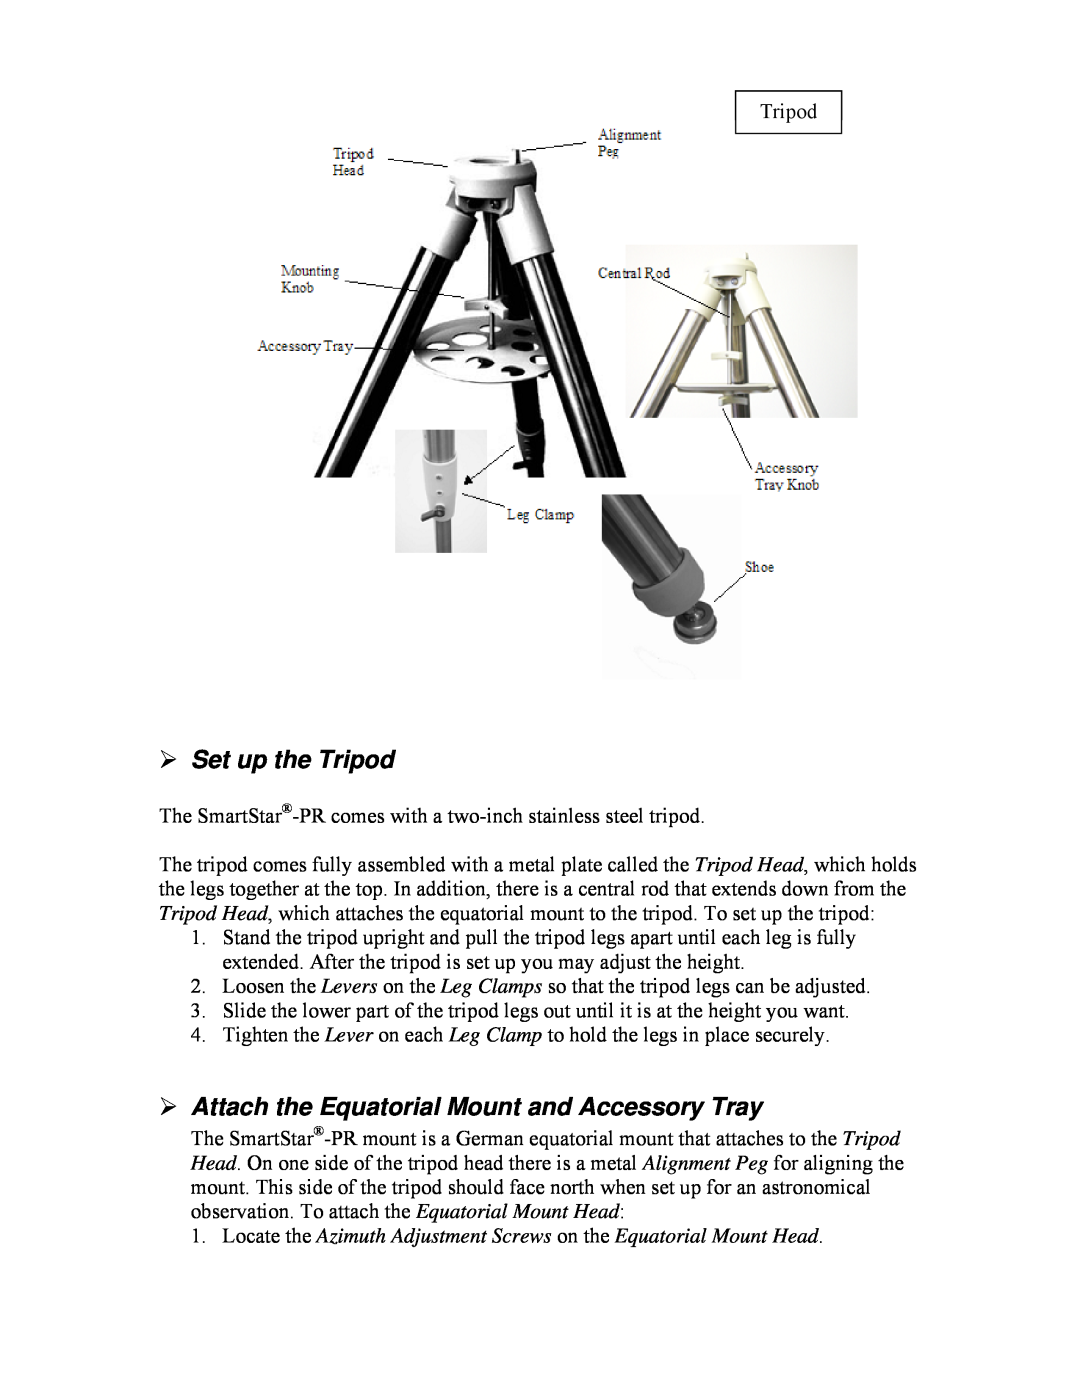 iOptron PR EQ manual Set up the Tripod, Attach the Equatorial Mount and Accessory Tray 